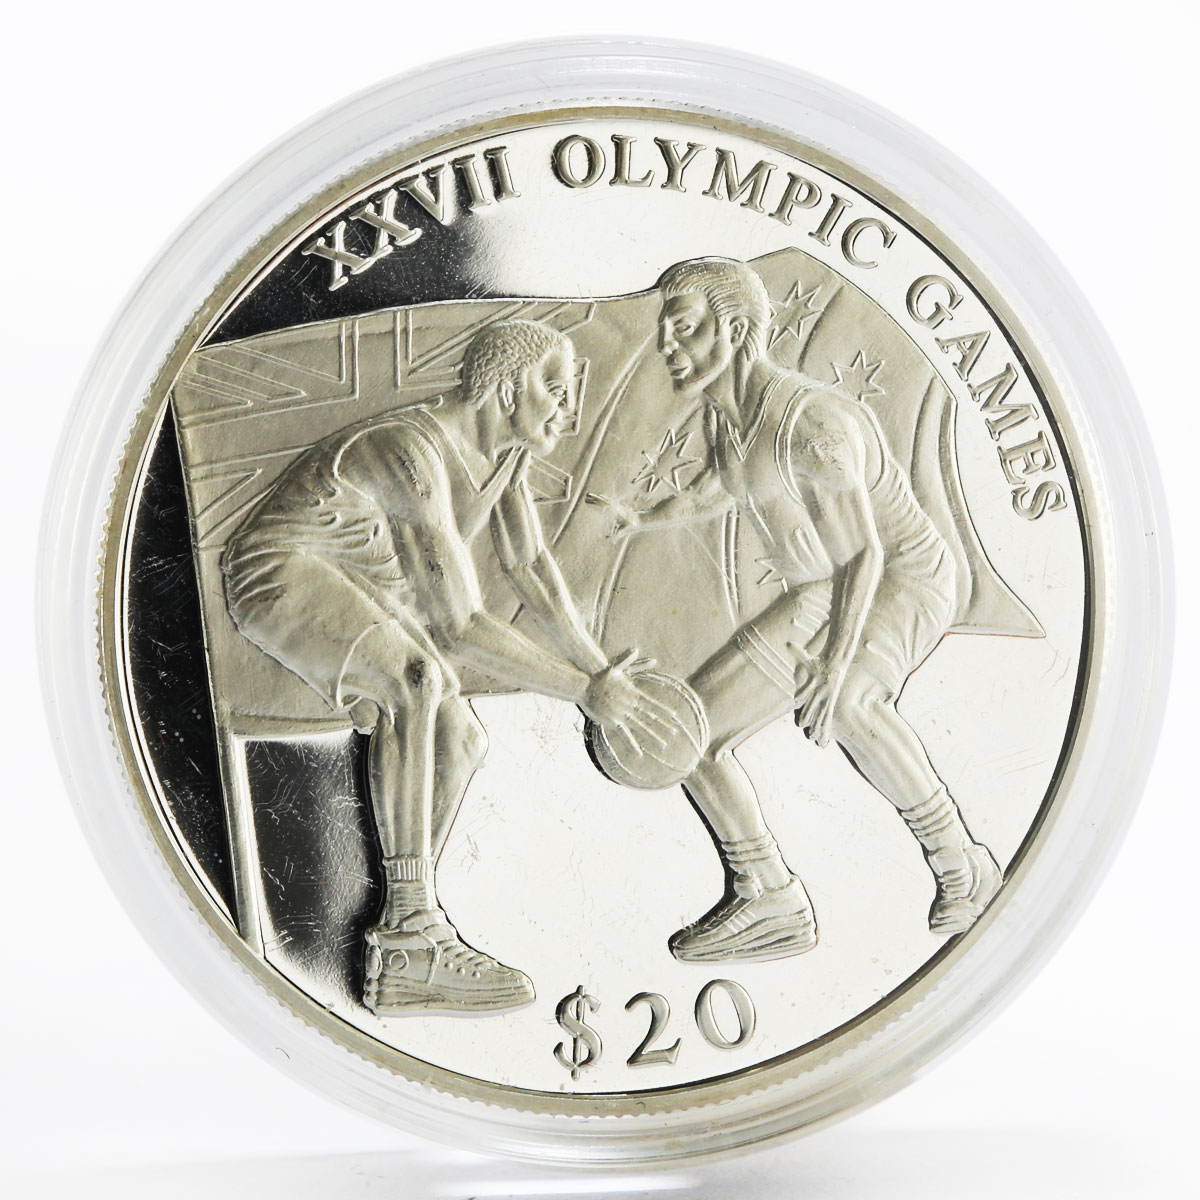 Liberia 20 dollars Sydney Olympic Games series Basketball proof silver coin 2000